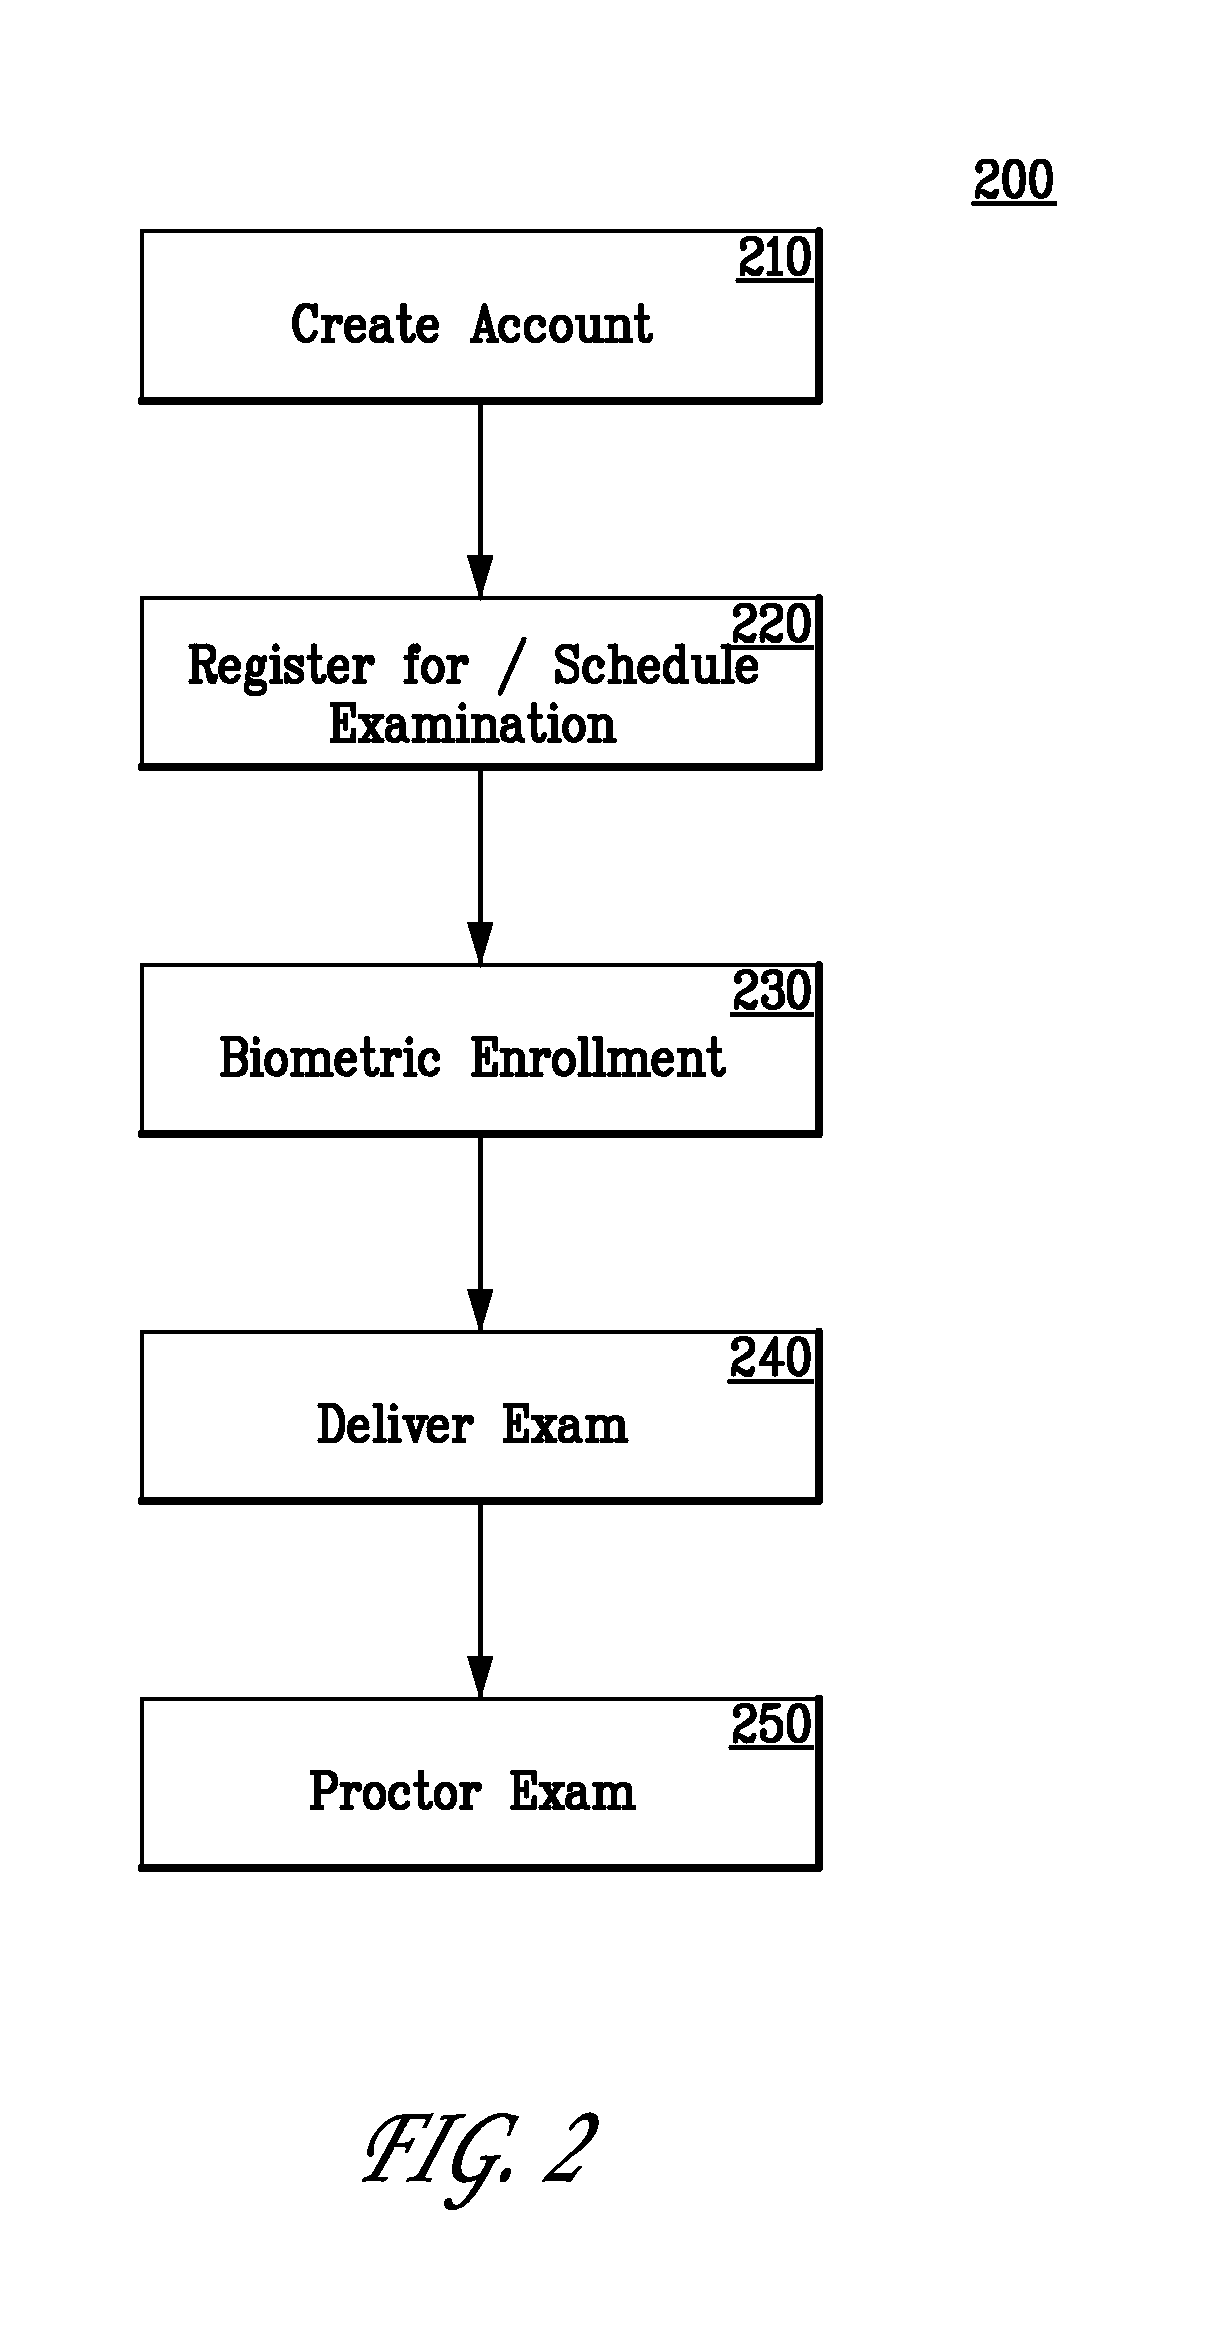 System for the Administration of a Secure, Online, Proctored Examination